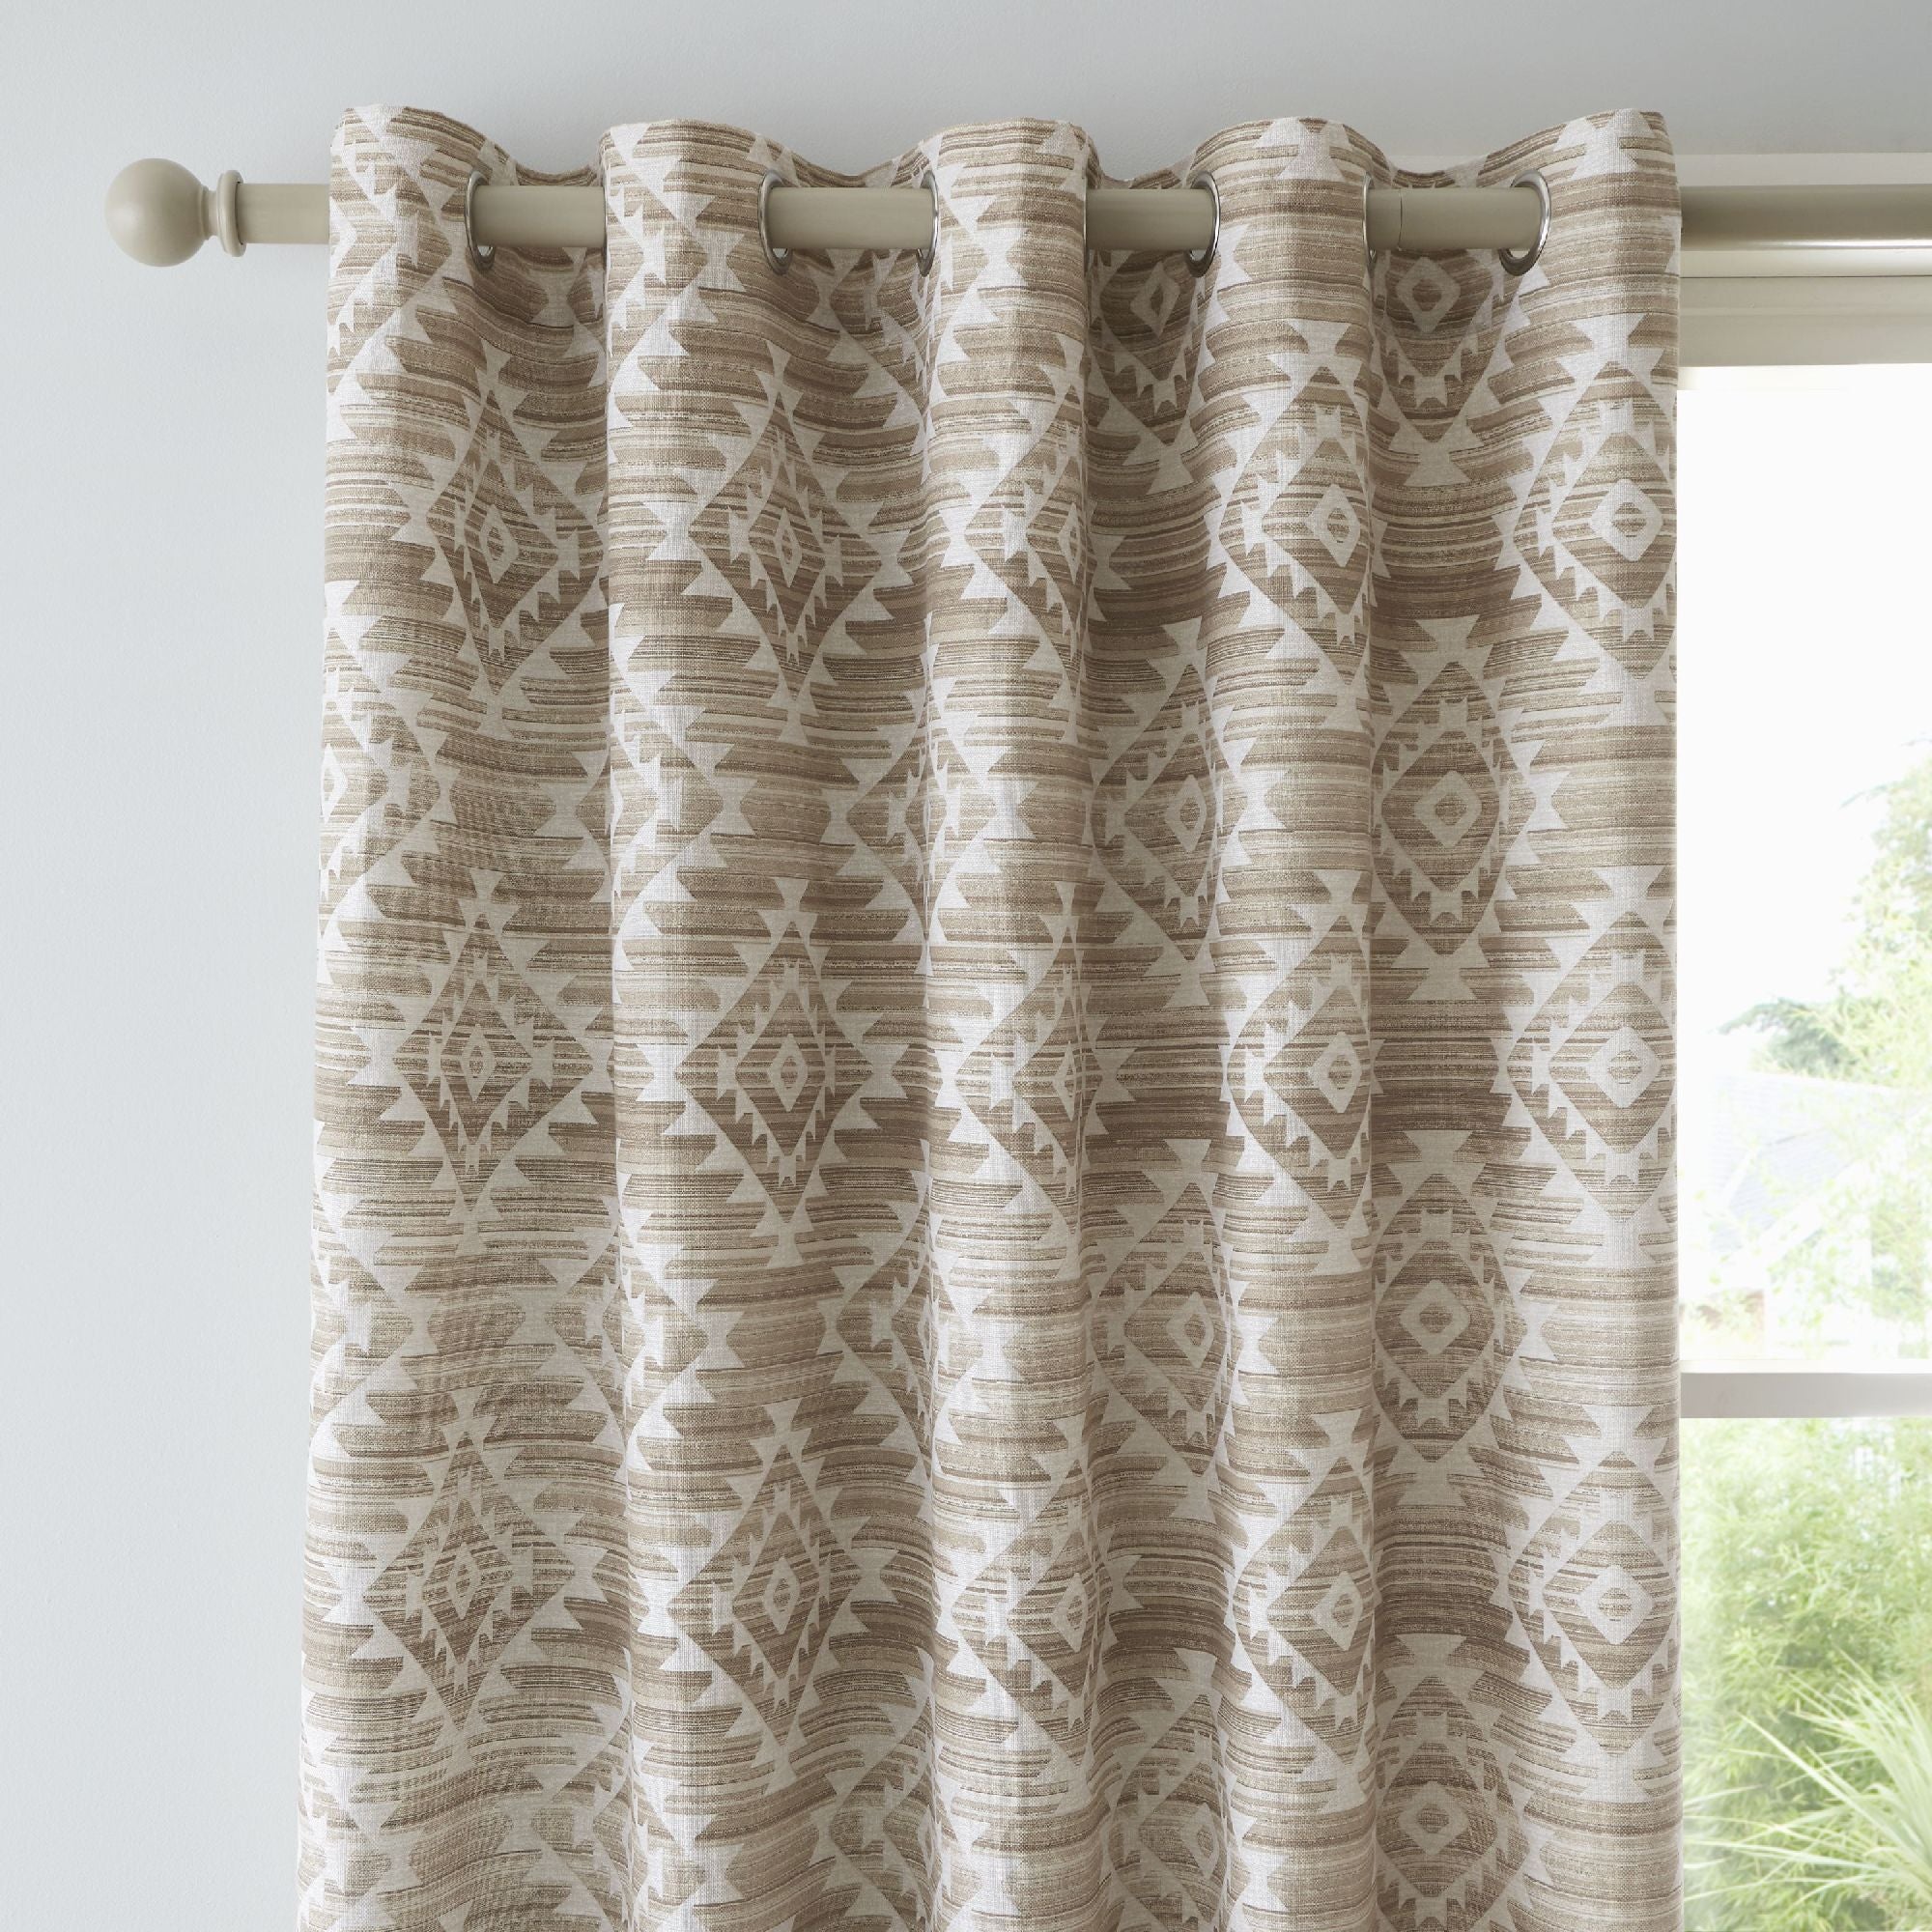 Photos - Curtains & Drapes AZTEC Geo Natural Eyelet Curtains Beige 